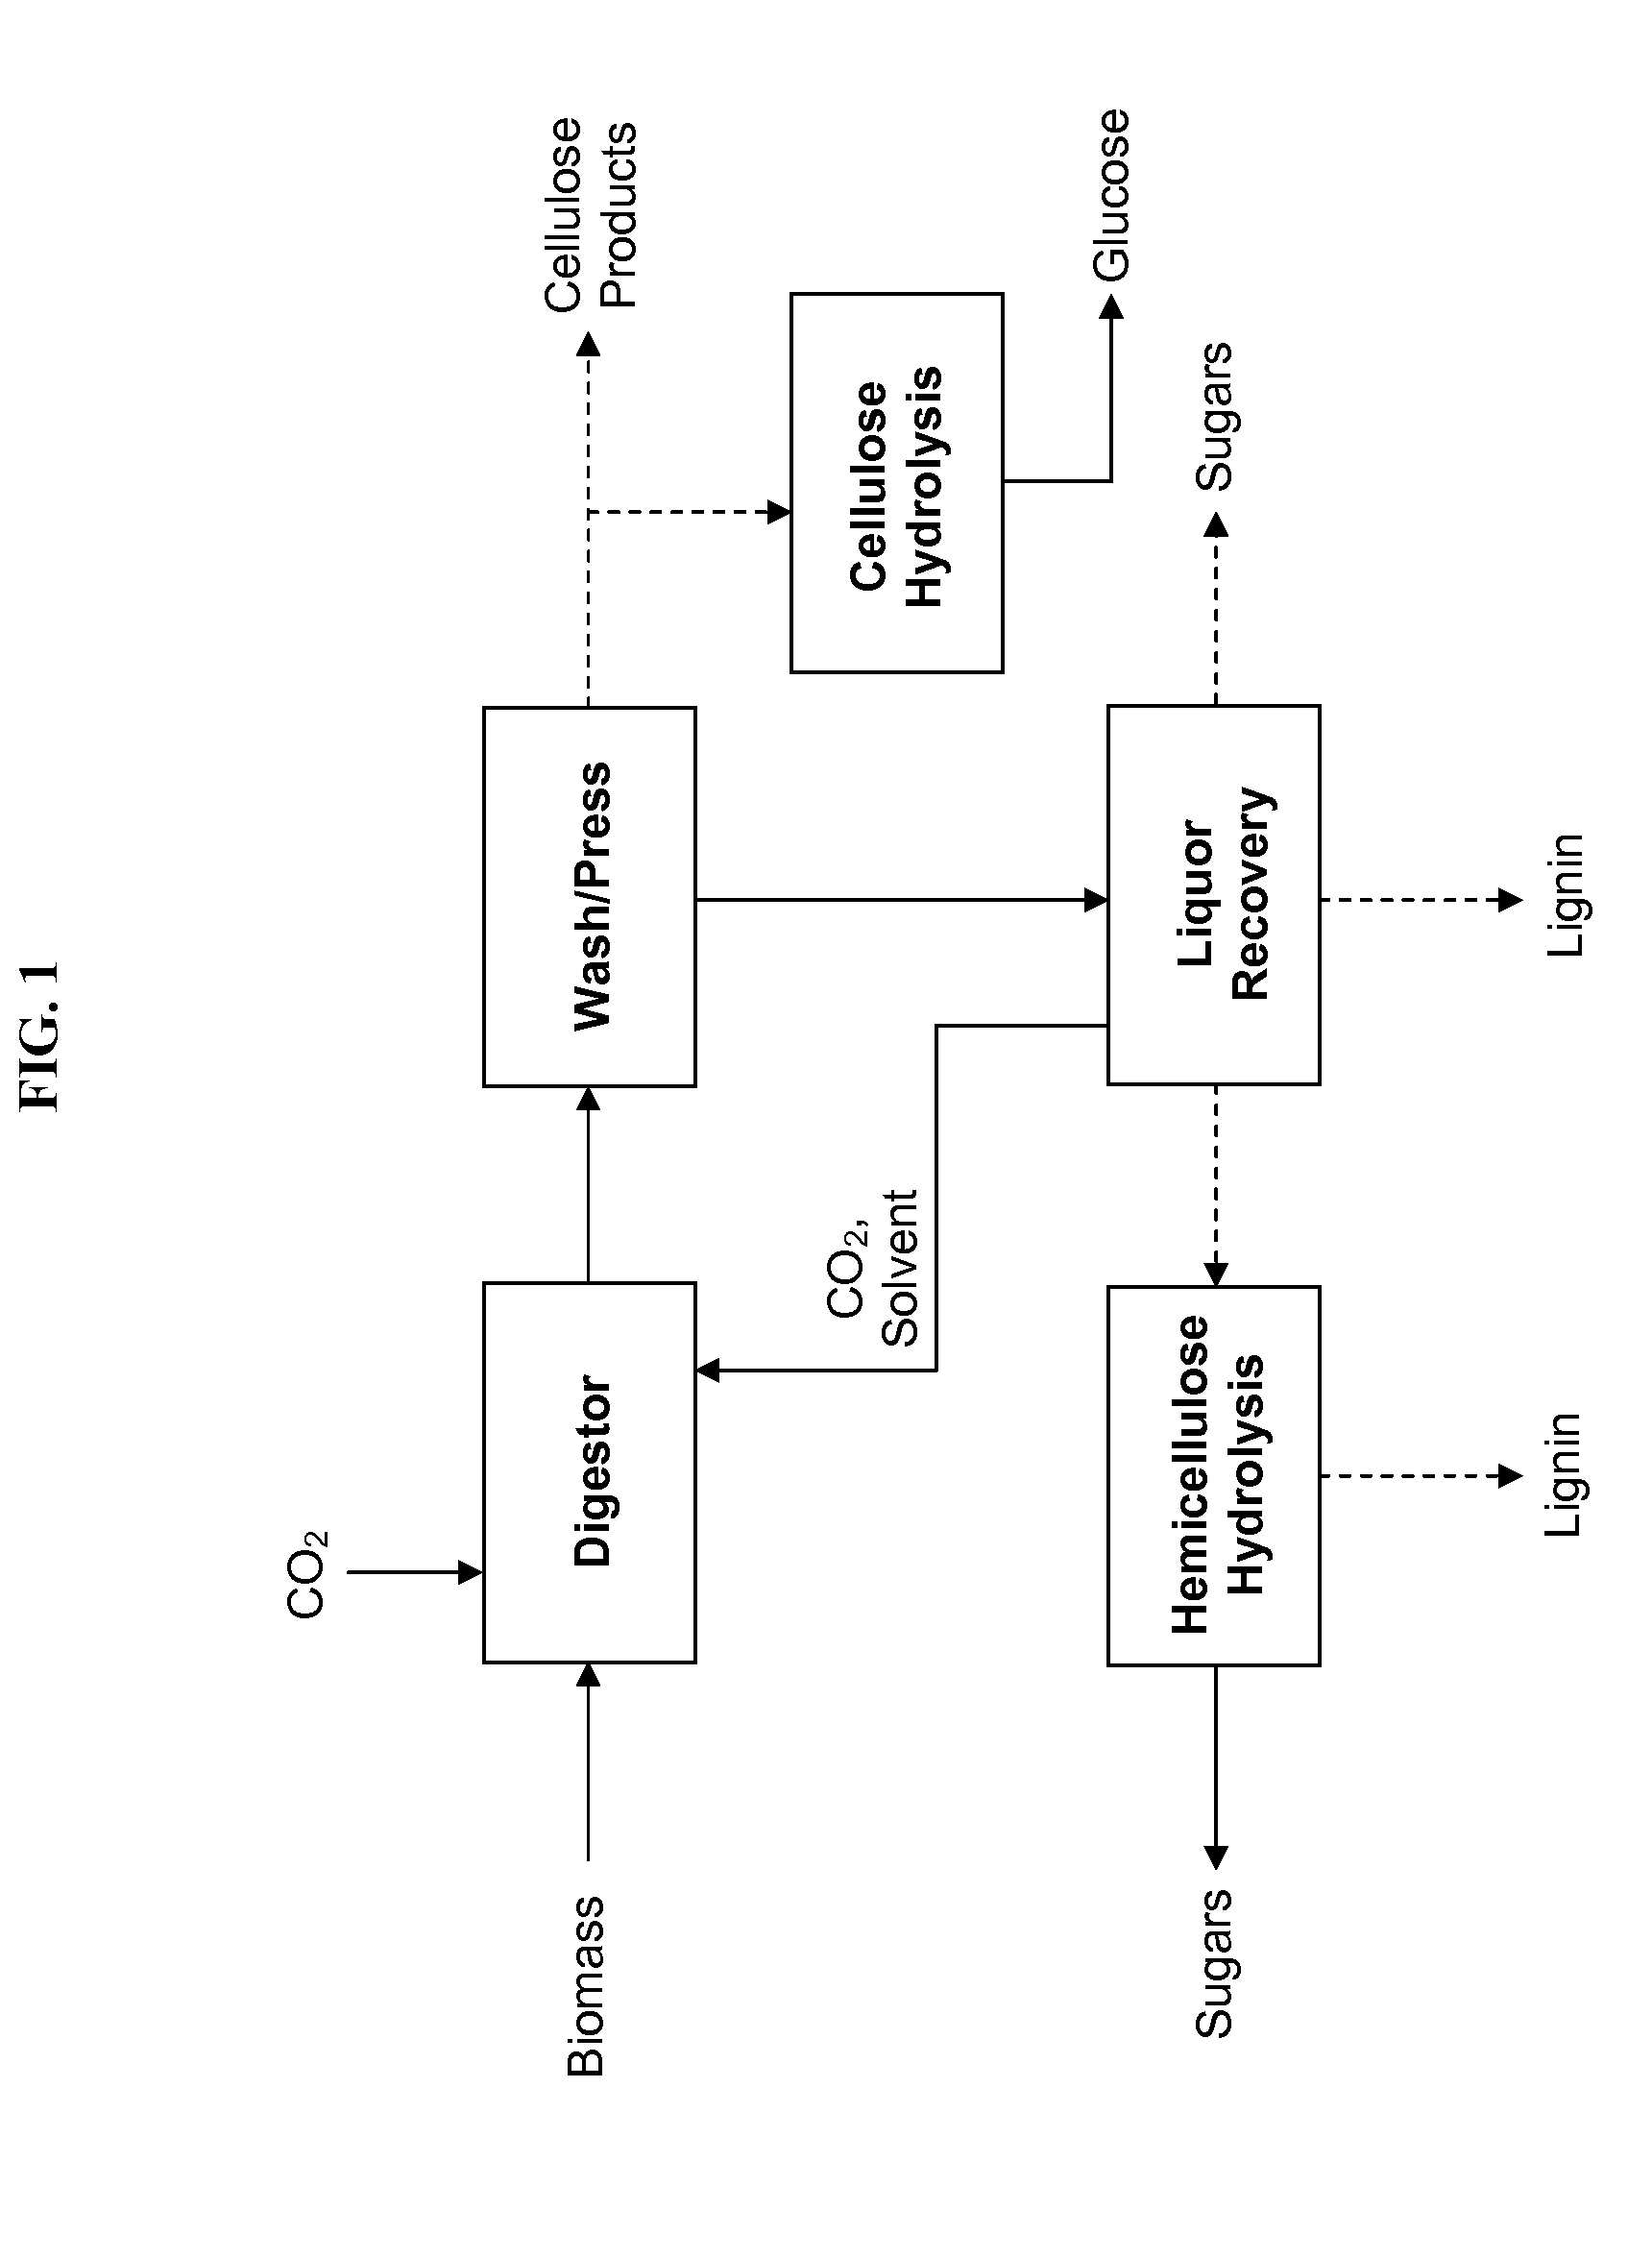 Biorefining processes and apparatus for separating cellulose hemicellulose, and lignin from biomass